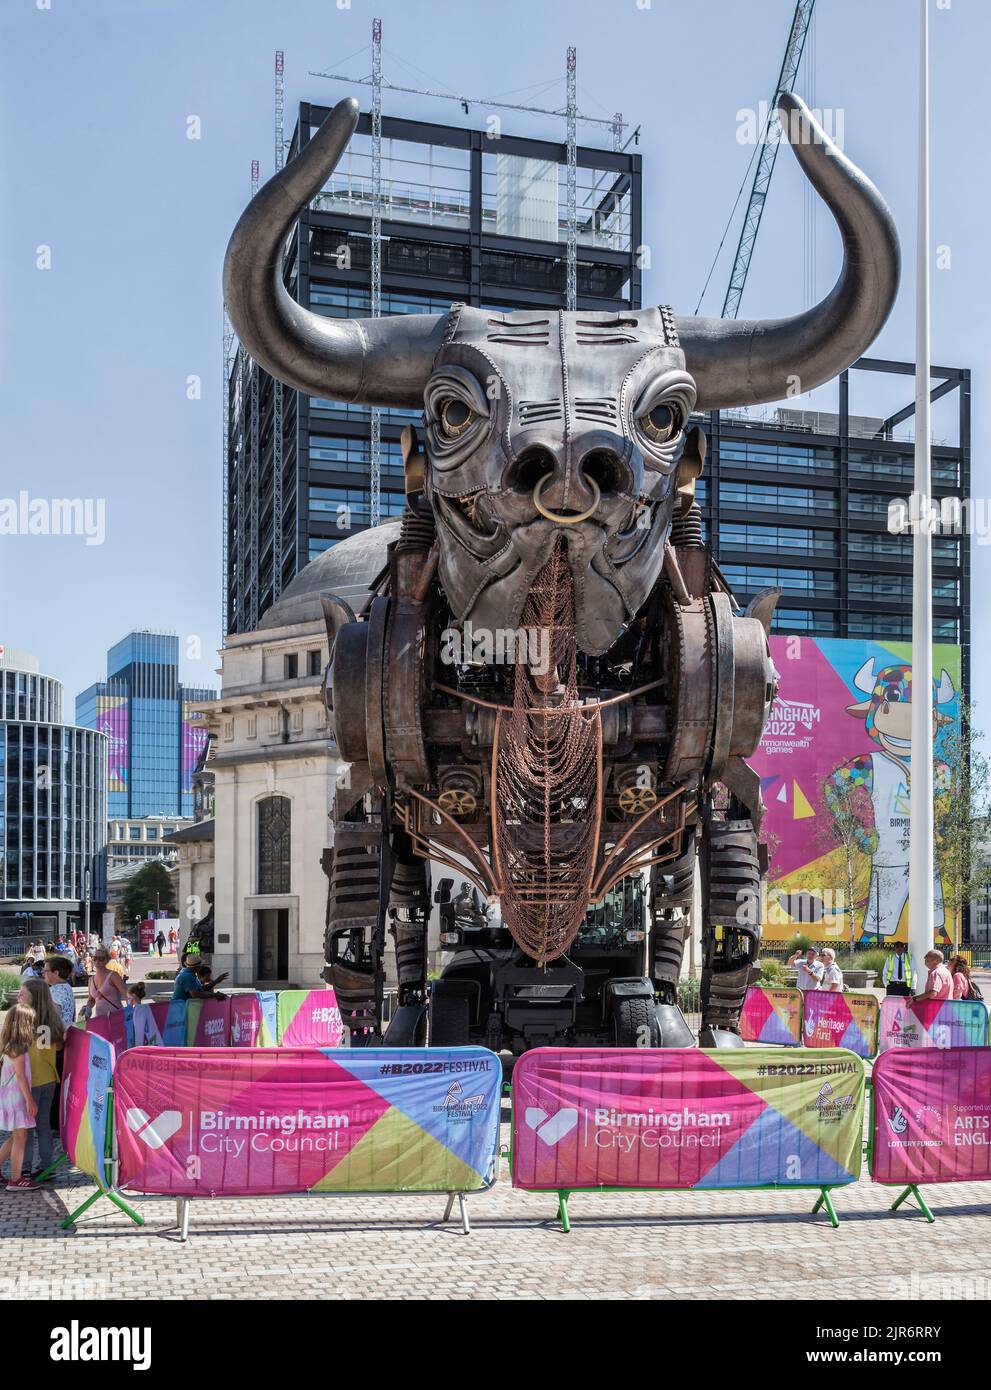 People look in wonder at the iconic 10 metre high raging bull from the 2022 Commonwealth Games opening ceremony. Centenary Square, Birmingham, England. Stock Photo